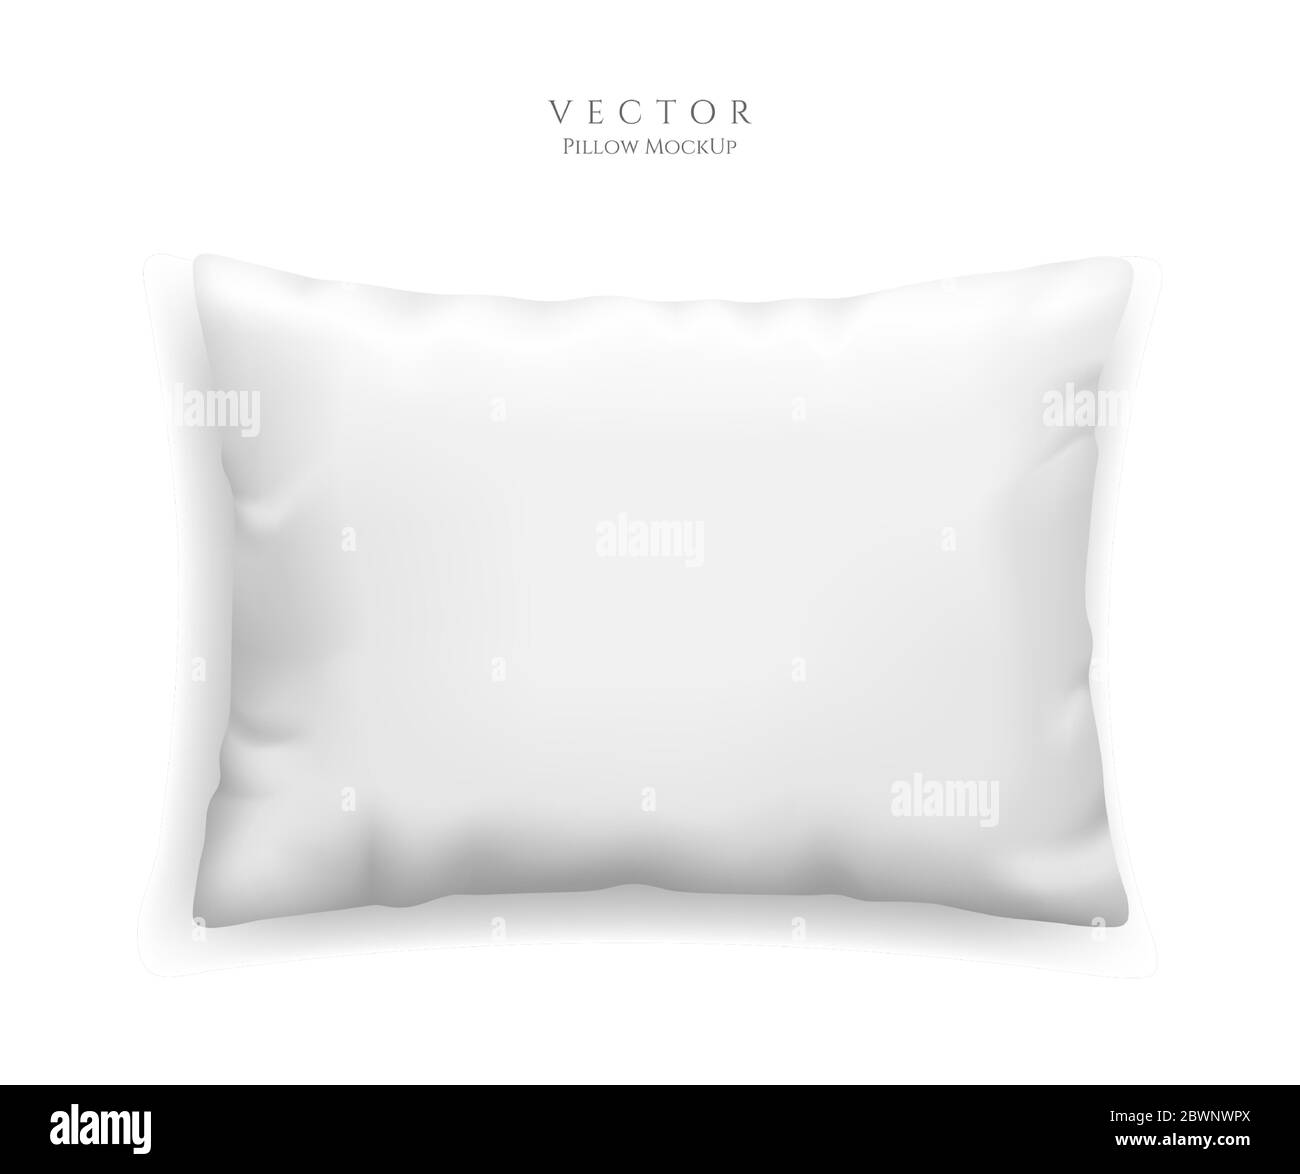 Clean white pillow mockup isolated on white background, vector illustration in realistic style. rectangular cushion for relaxation and sleep template. Stock Vector